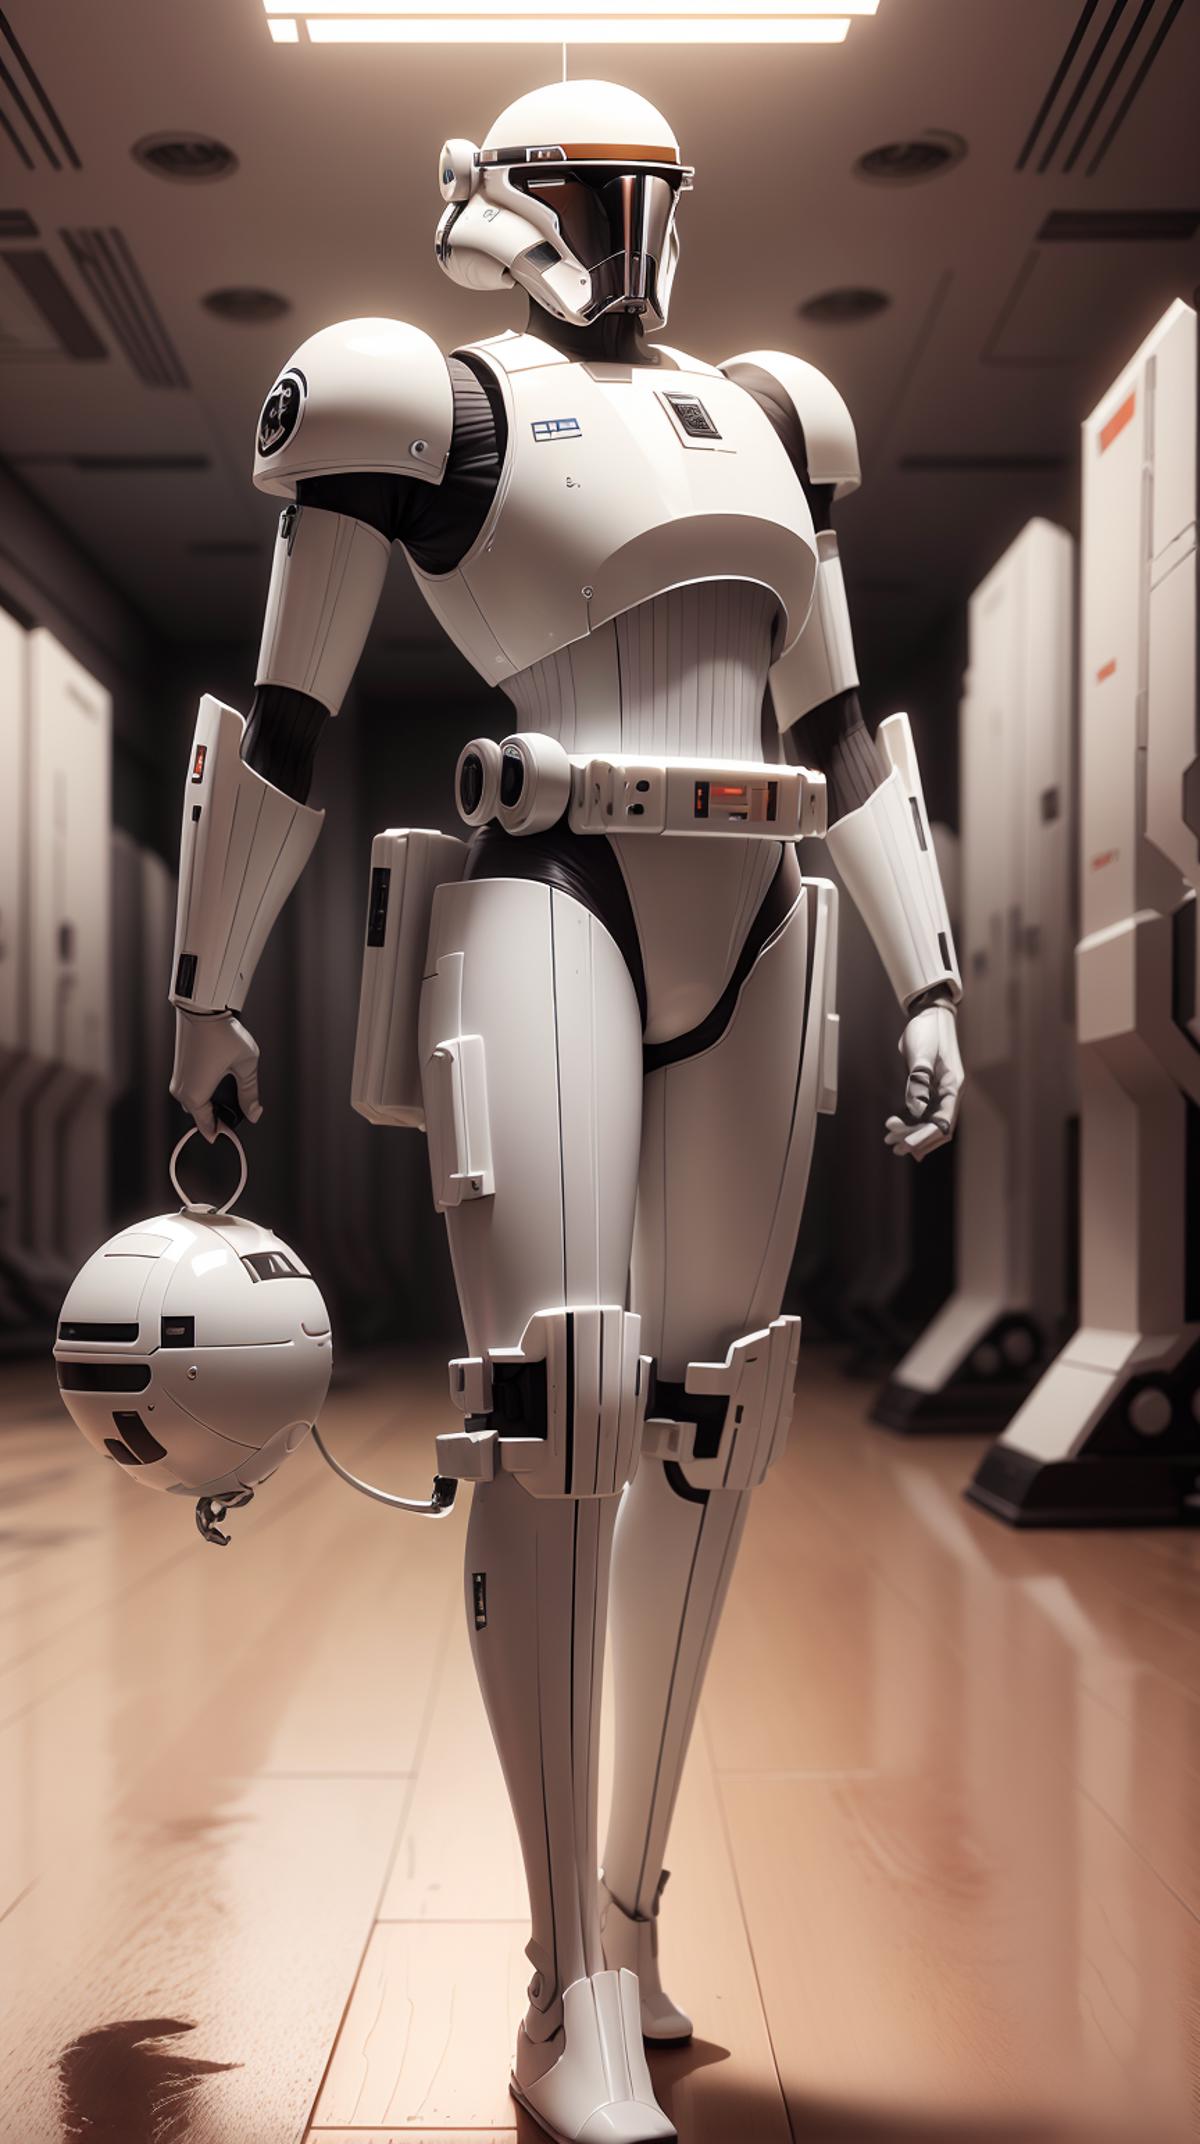 Galactic Empire Style - Stormtroopify anything! image by mnemic